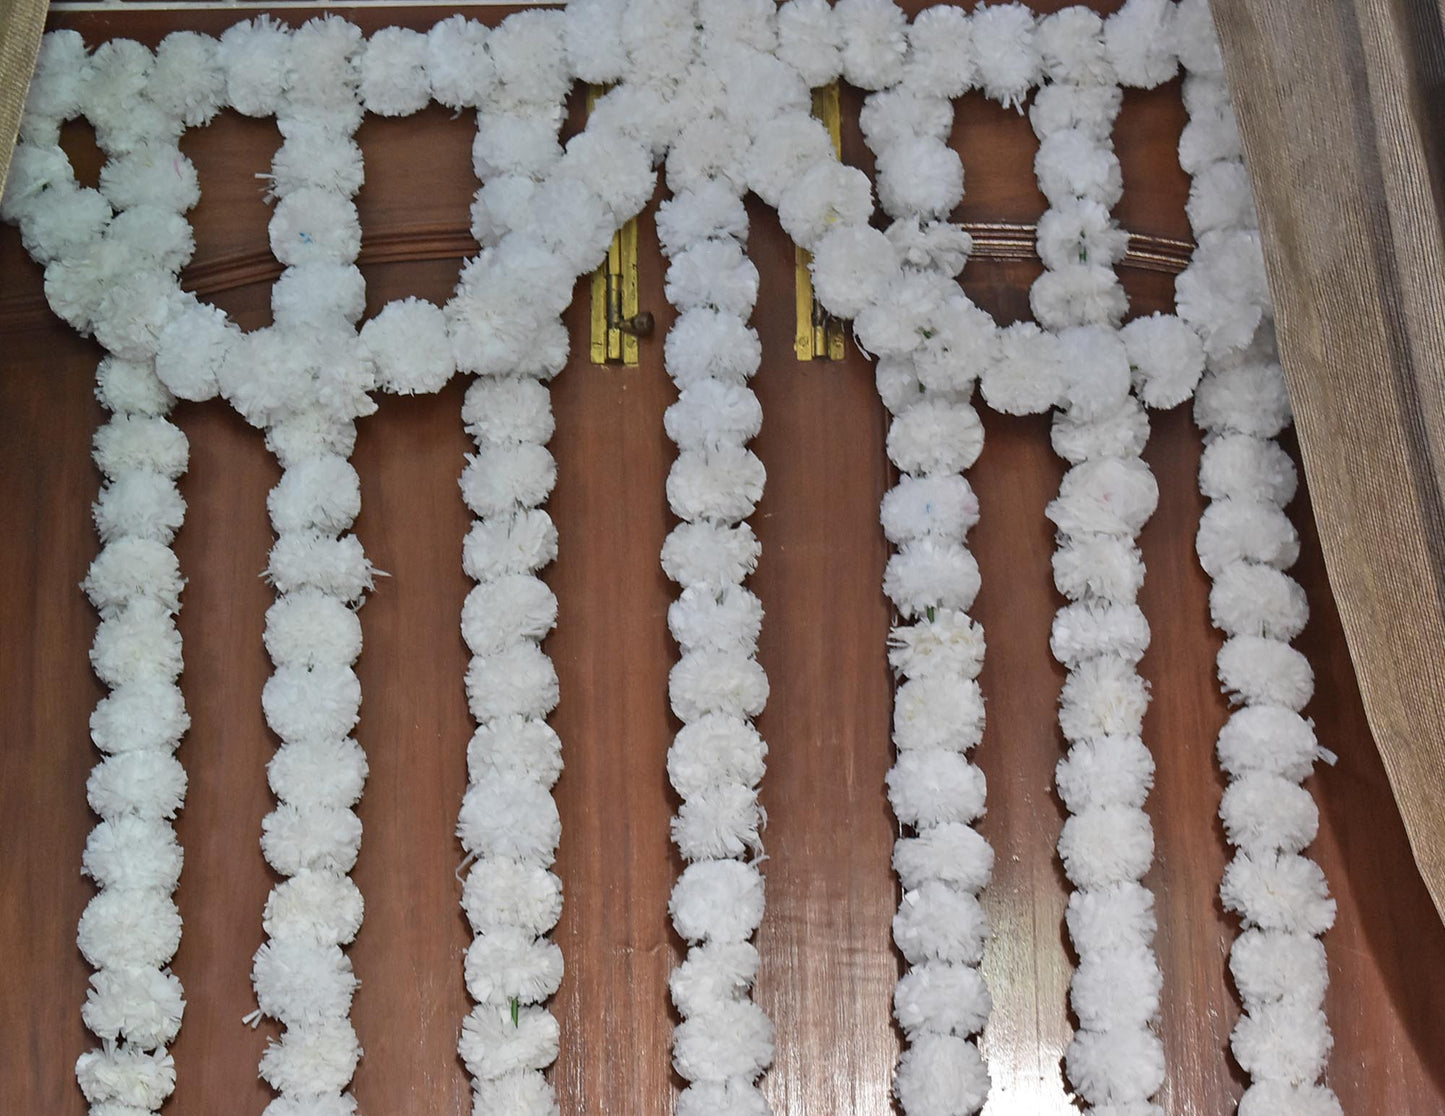 Pack of 5 - Artificial Marigold Flower Garland strings - 4.5 ft + (white )